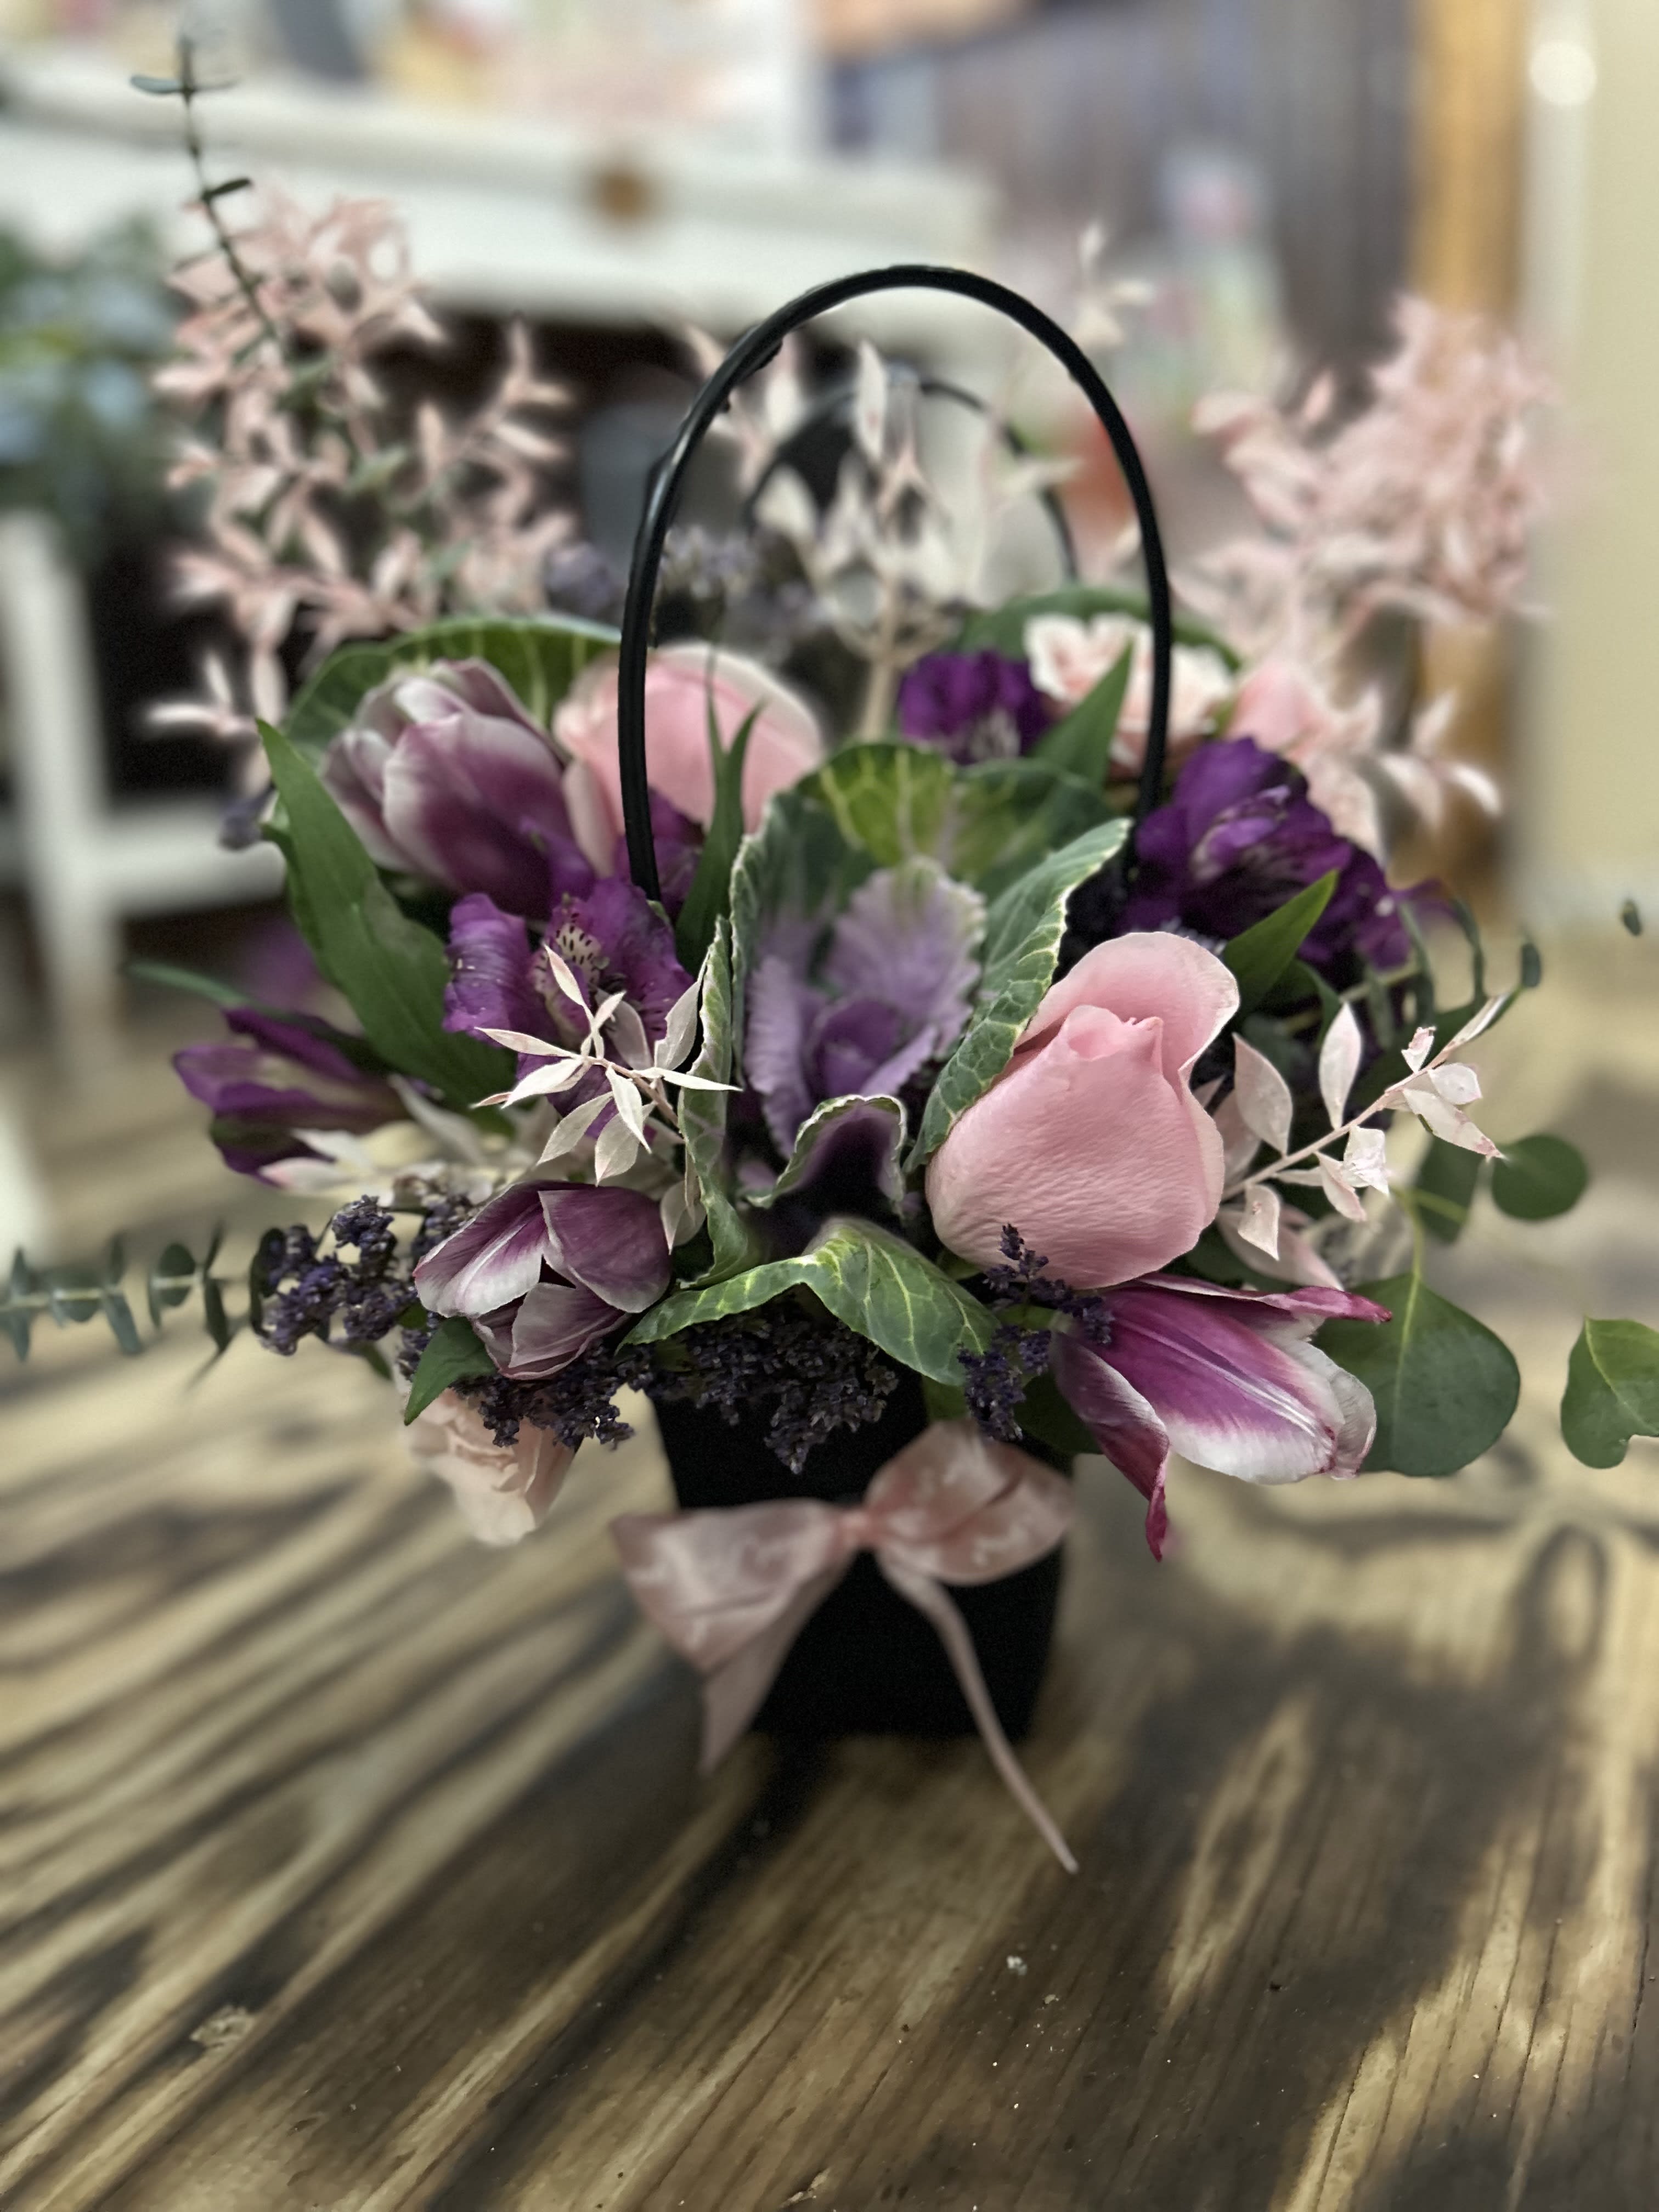 Purple Haze Purse Arrangement - Purple Purple &amp; Purple. Such a cute gesture that wont break the bank but cute &amp; unique. Flower arrangement for any occasion!  **NOTE: Flowers and shades of purple can vary due to season and availibility but will be same look and value.